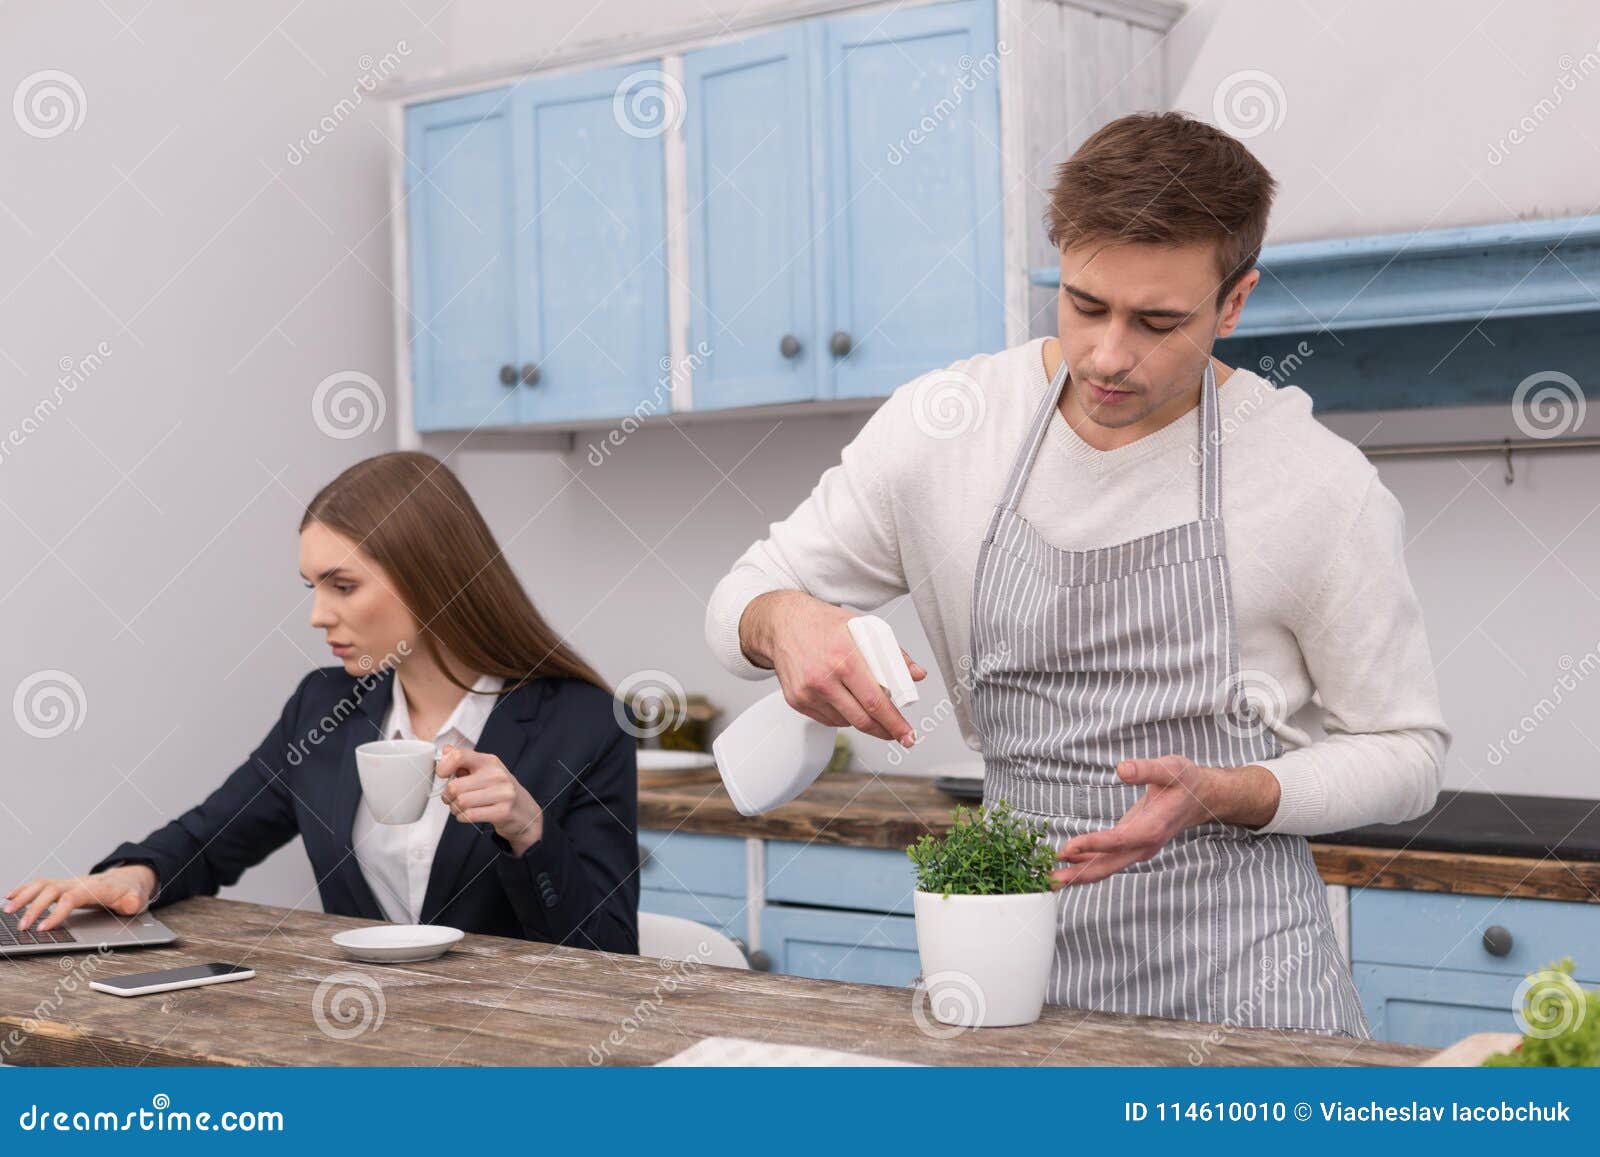 Obedient Husband Taking Care Of Flowers Stock Photo Image